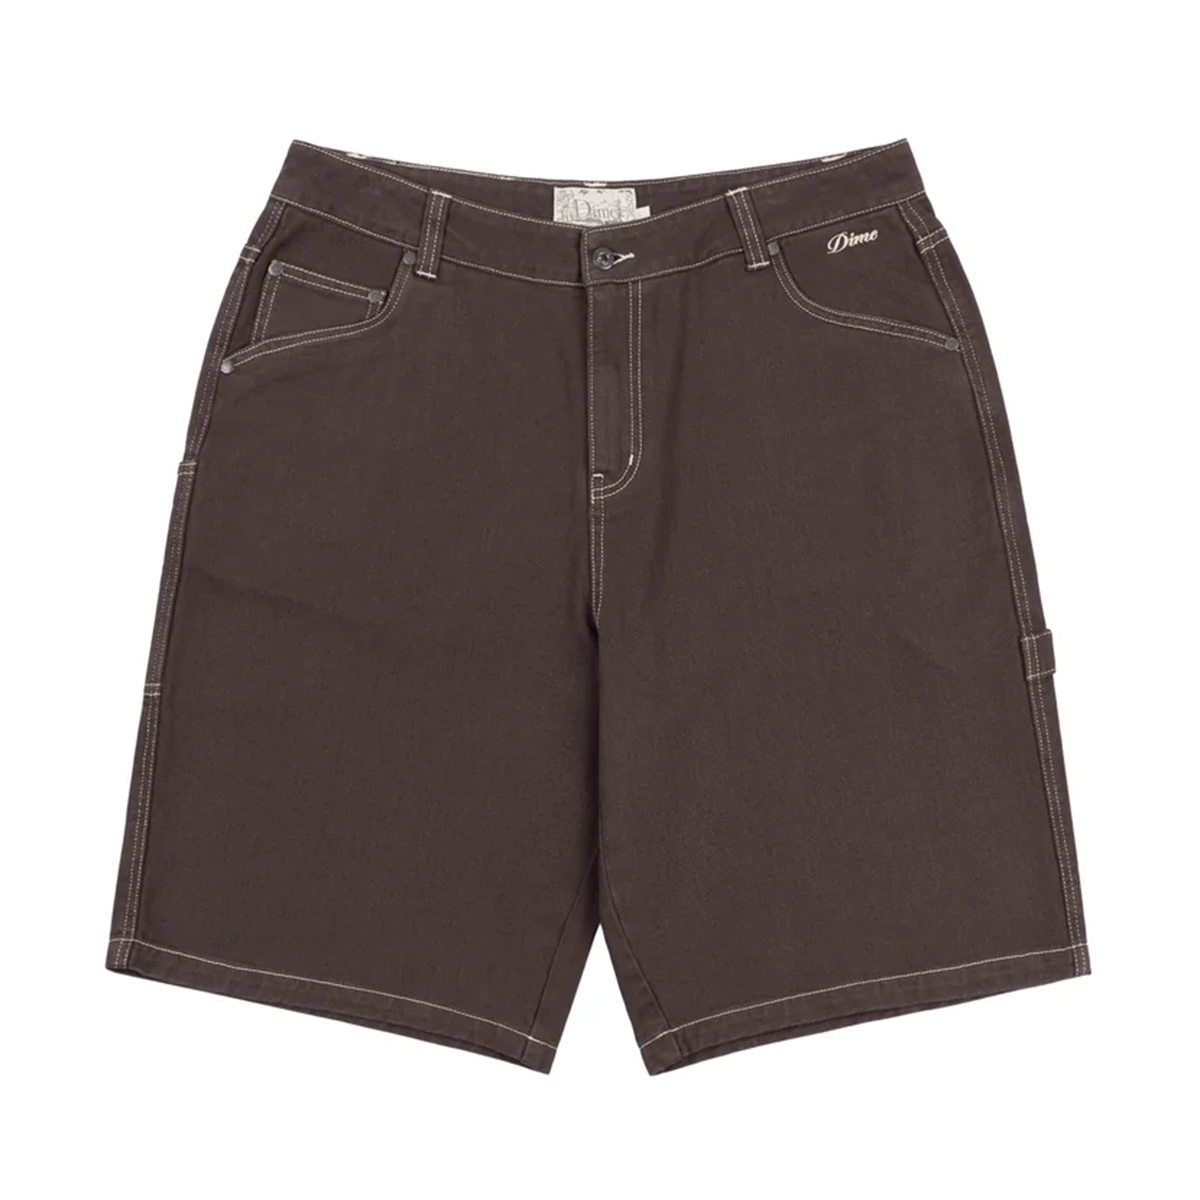 Dime Classic Denim Shorts - Brown Washed